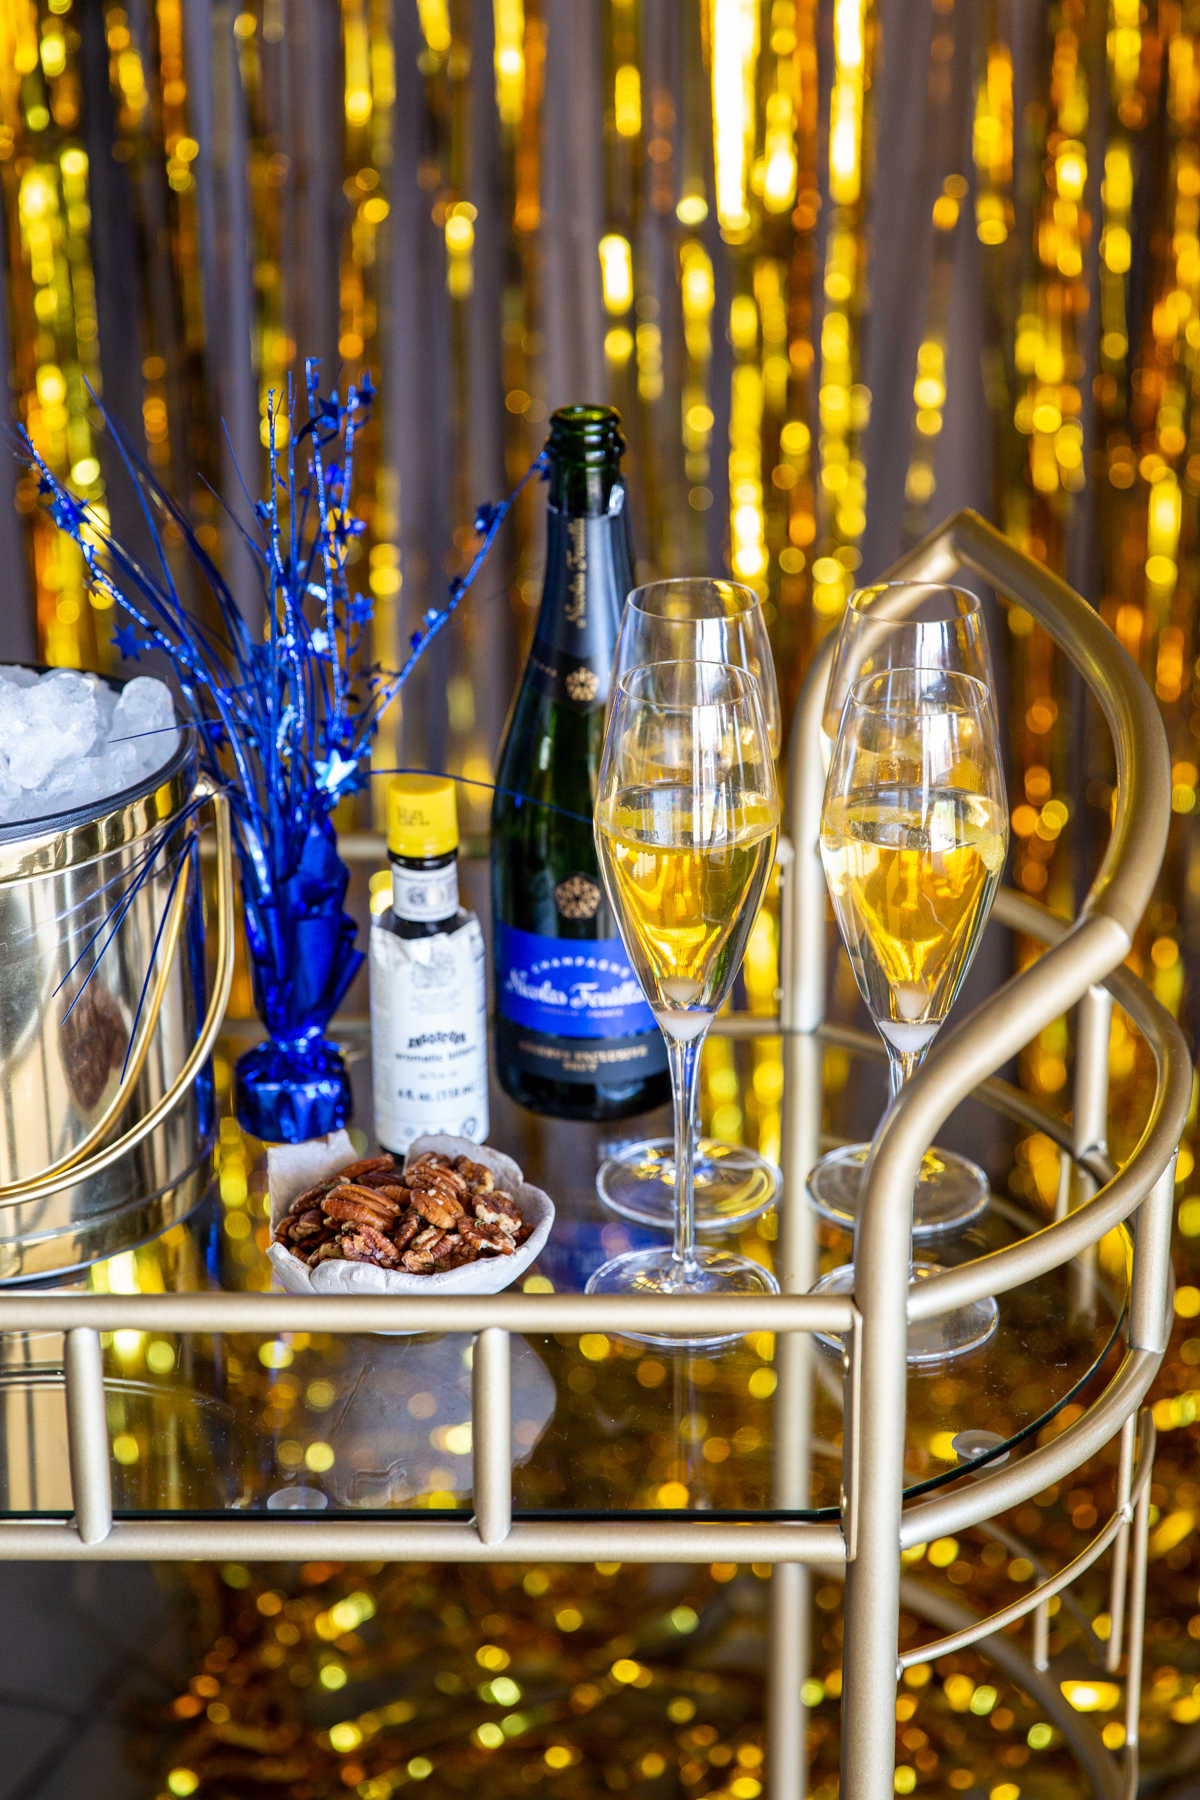 A bar cart with champagne cocktails, nuts and New Year's decorations.